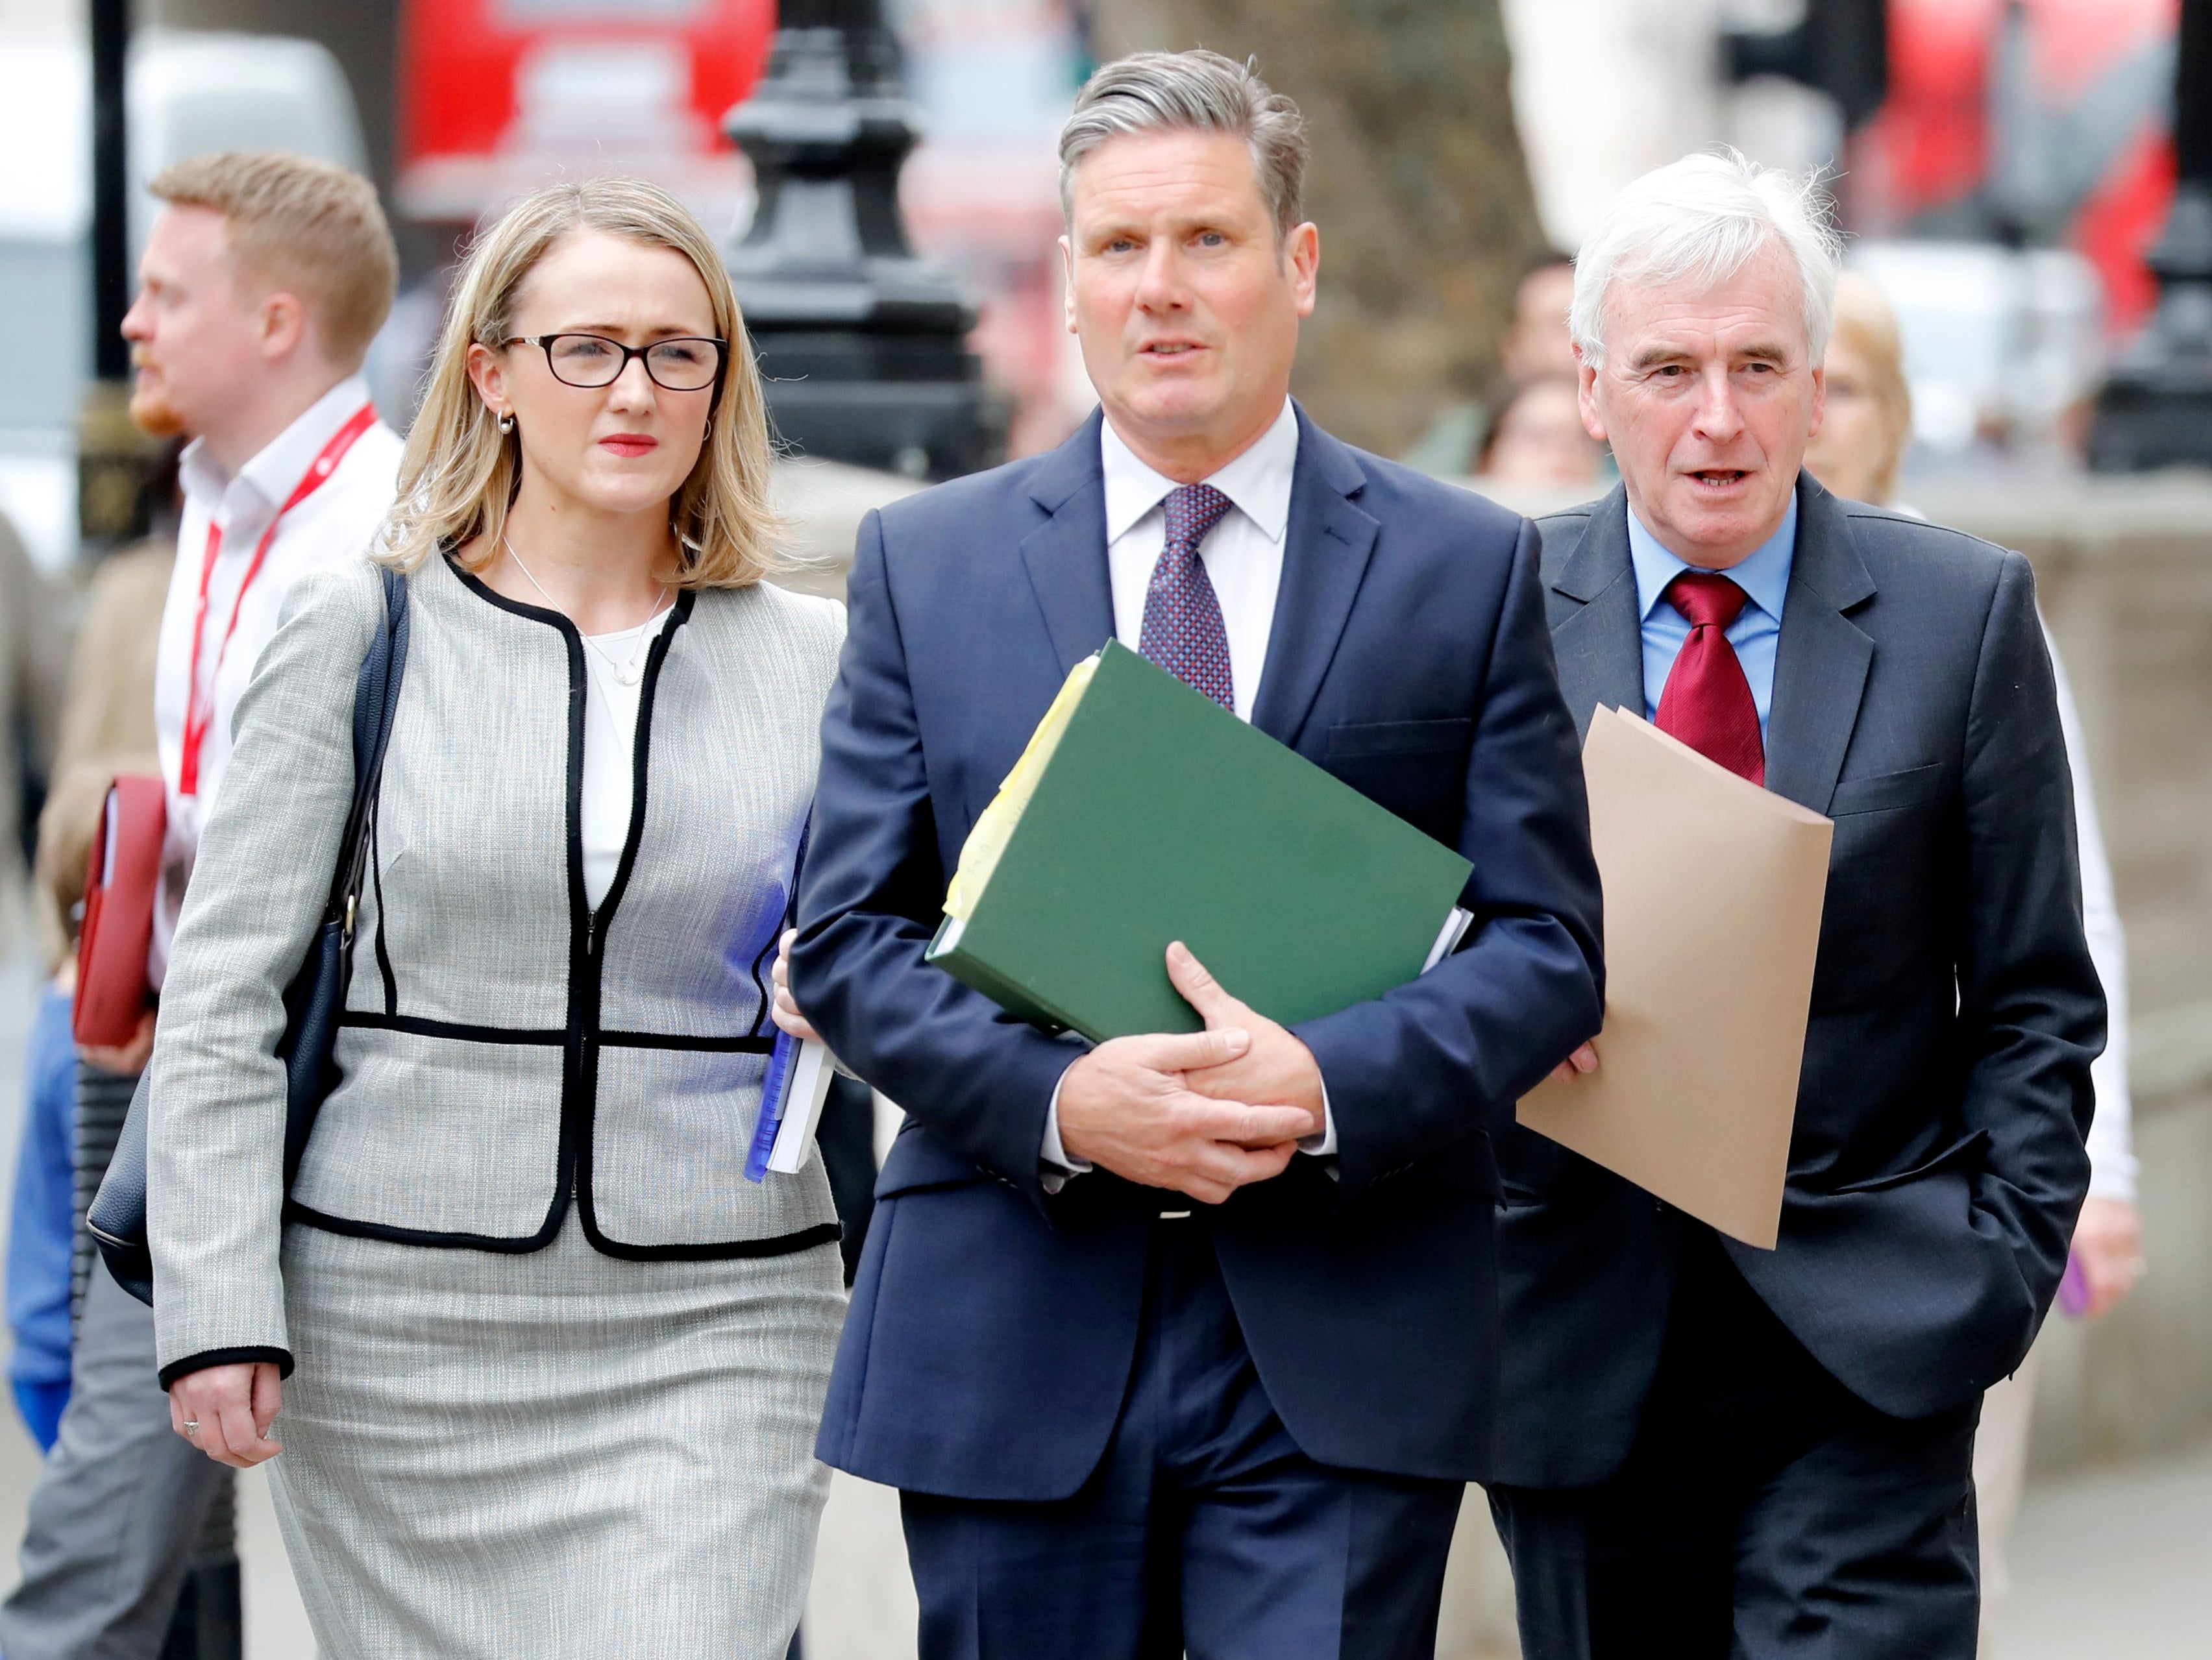 Starmer with Rebecca Long-Bailey and John McDonnell, two prominent figures of the left